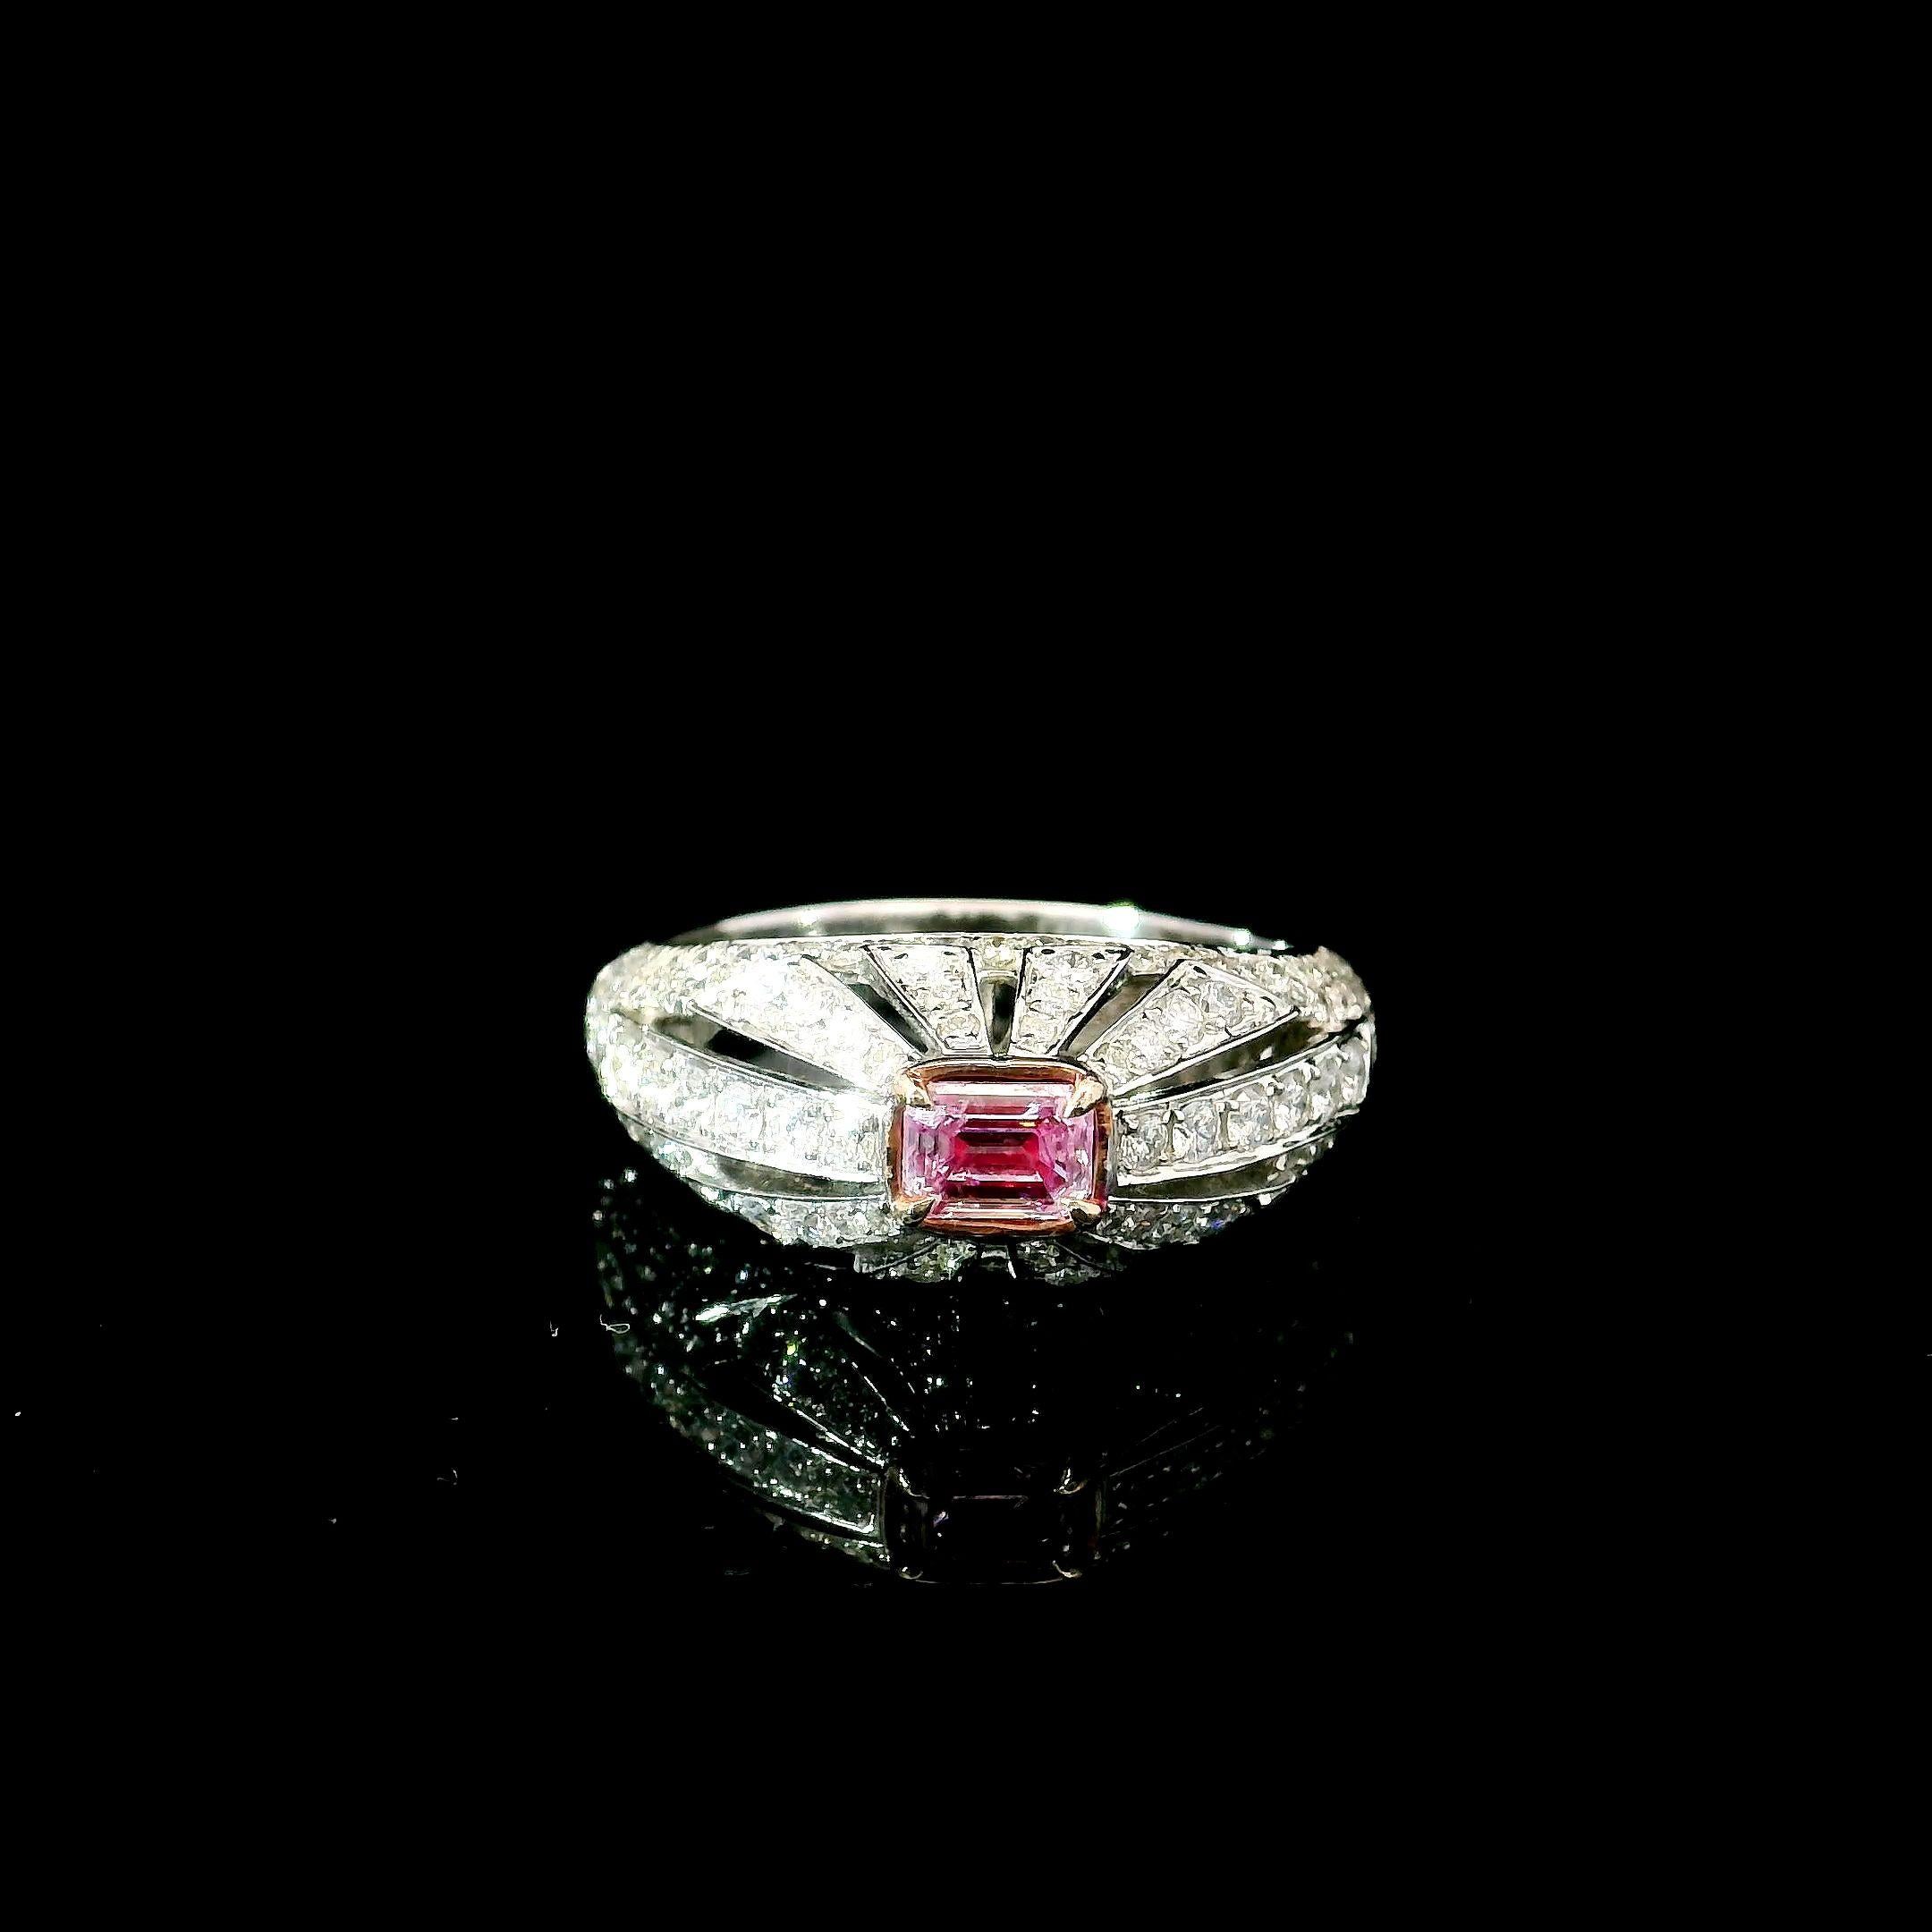 Emerald Cut 0.33 Carat Faint Pink Diamond Ring I1 Clarity GIA Certified  For Sale